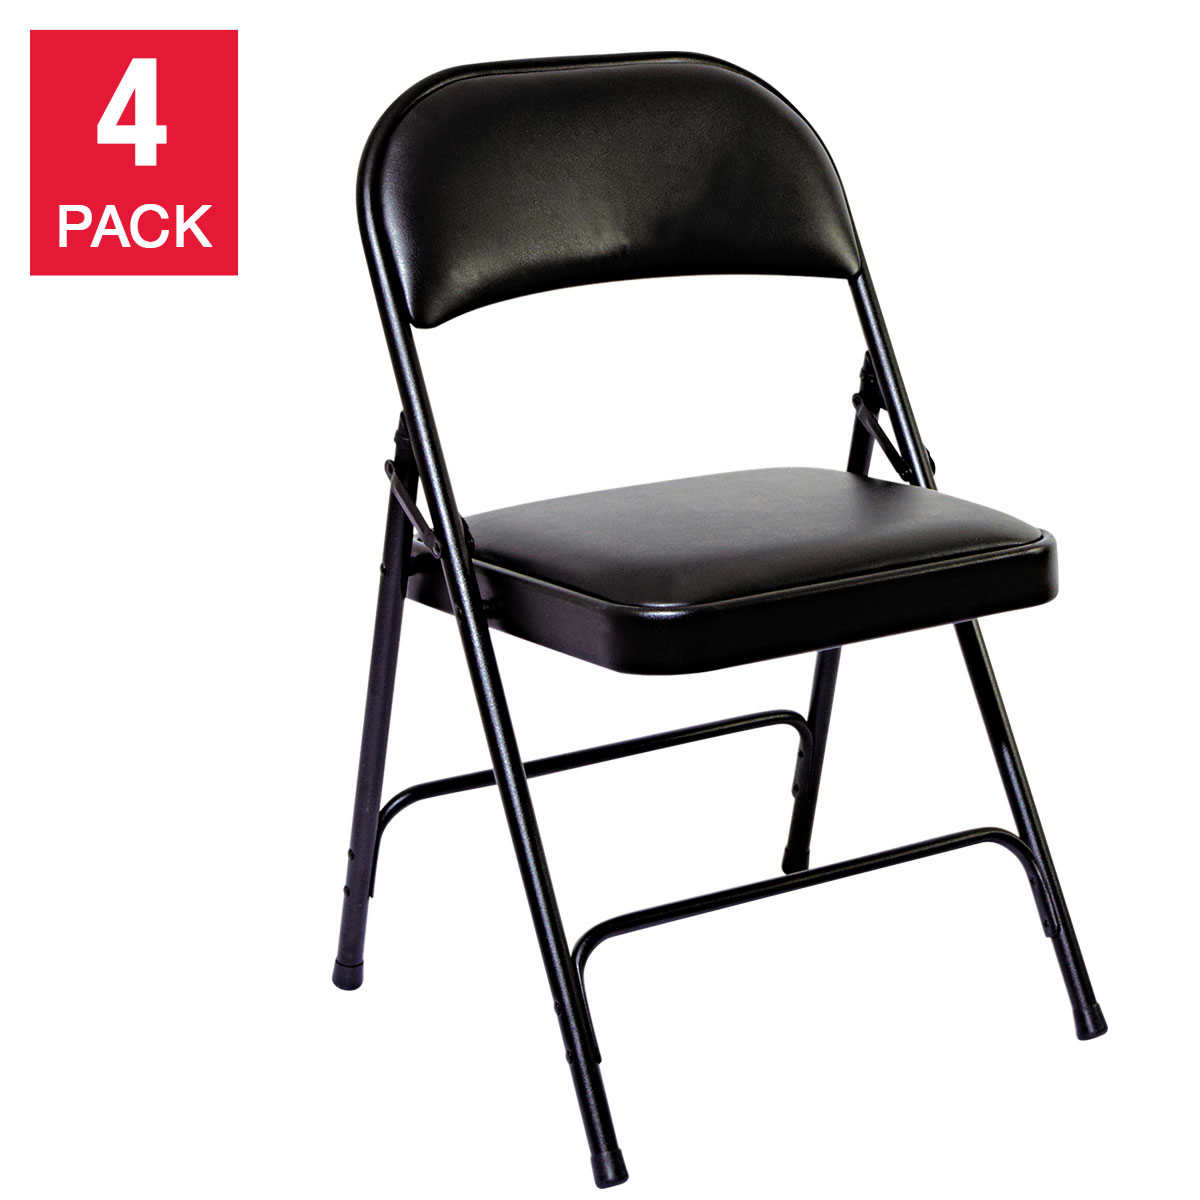 Alera Steel Folding Chairs With Padded Seat Black 4 Pack Costco